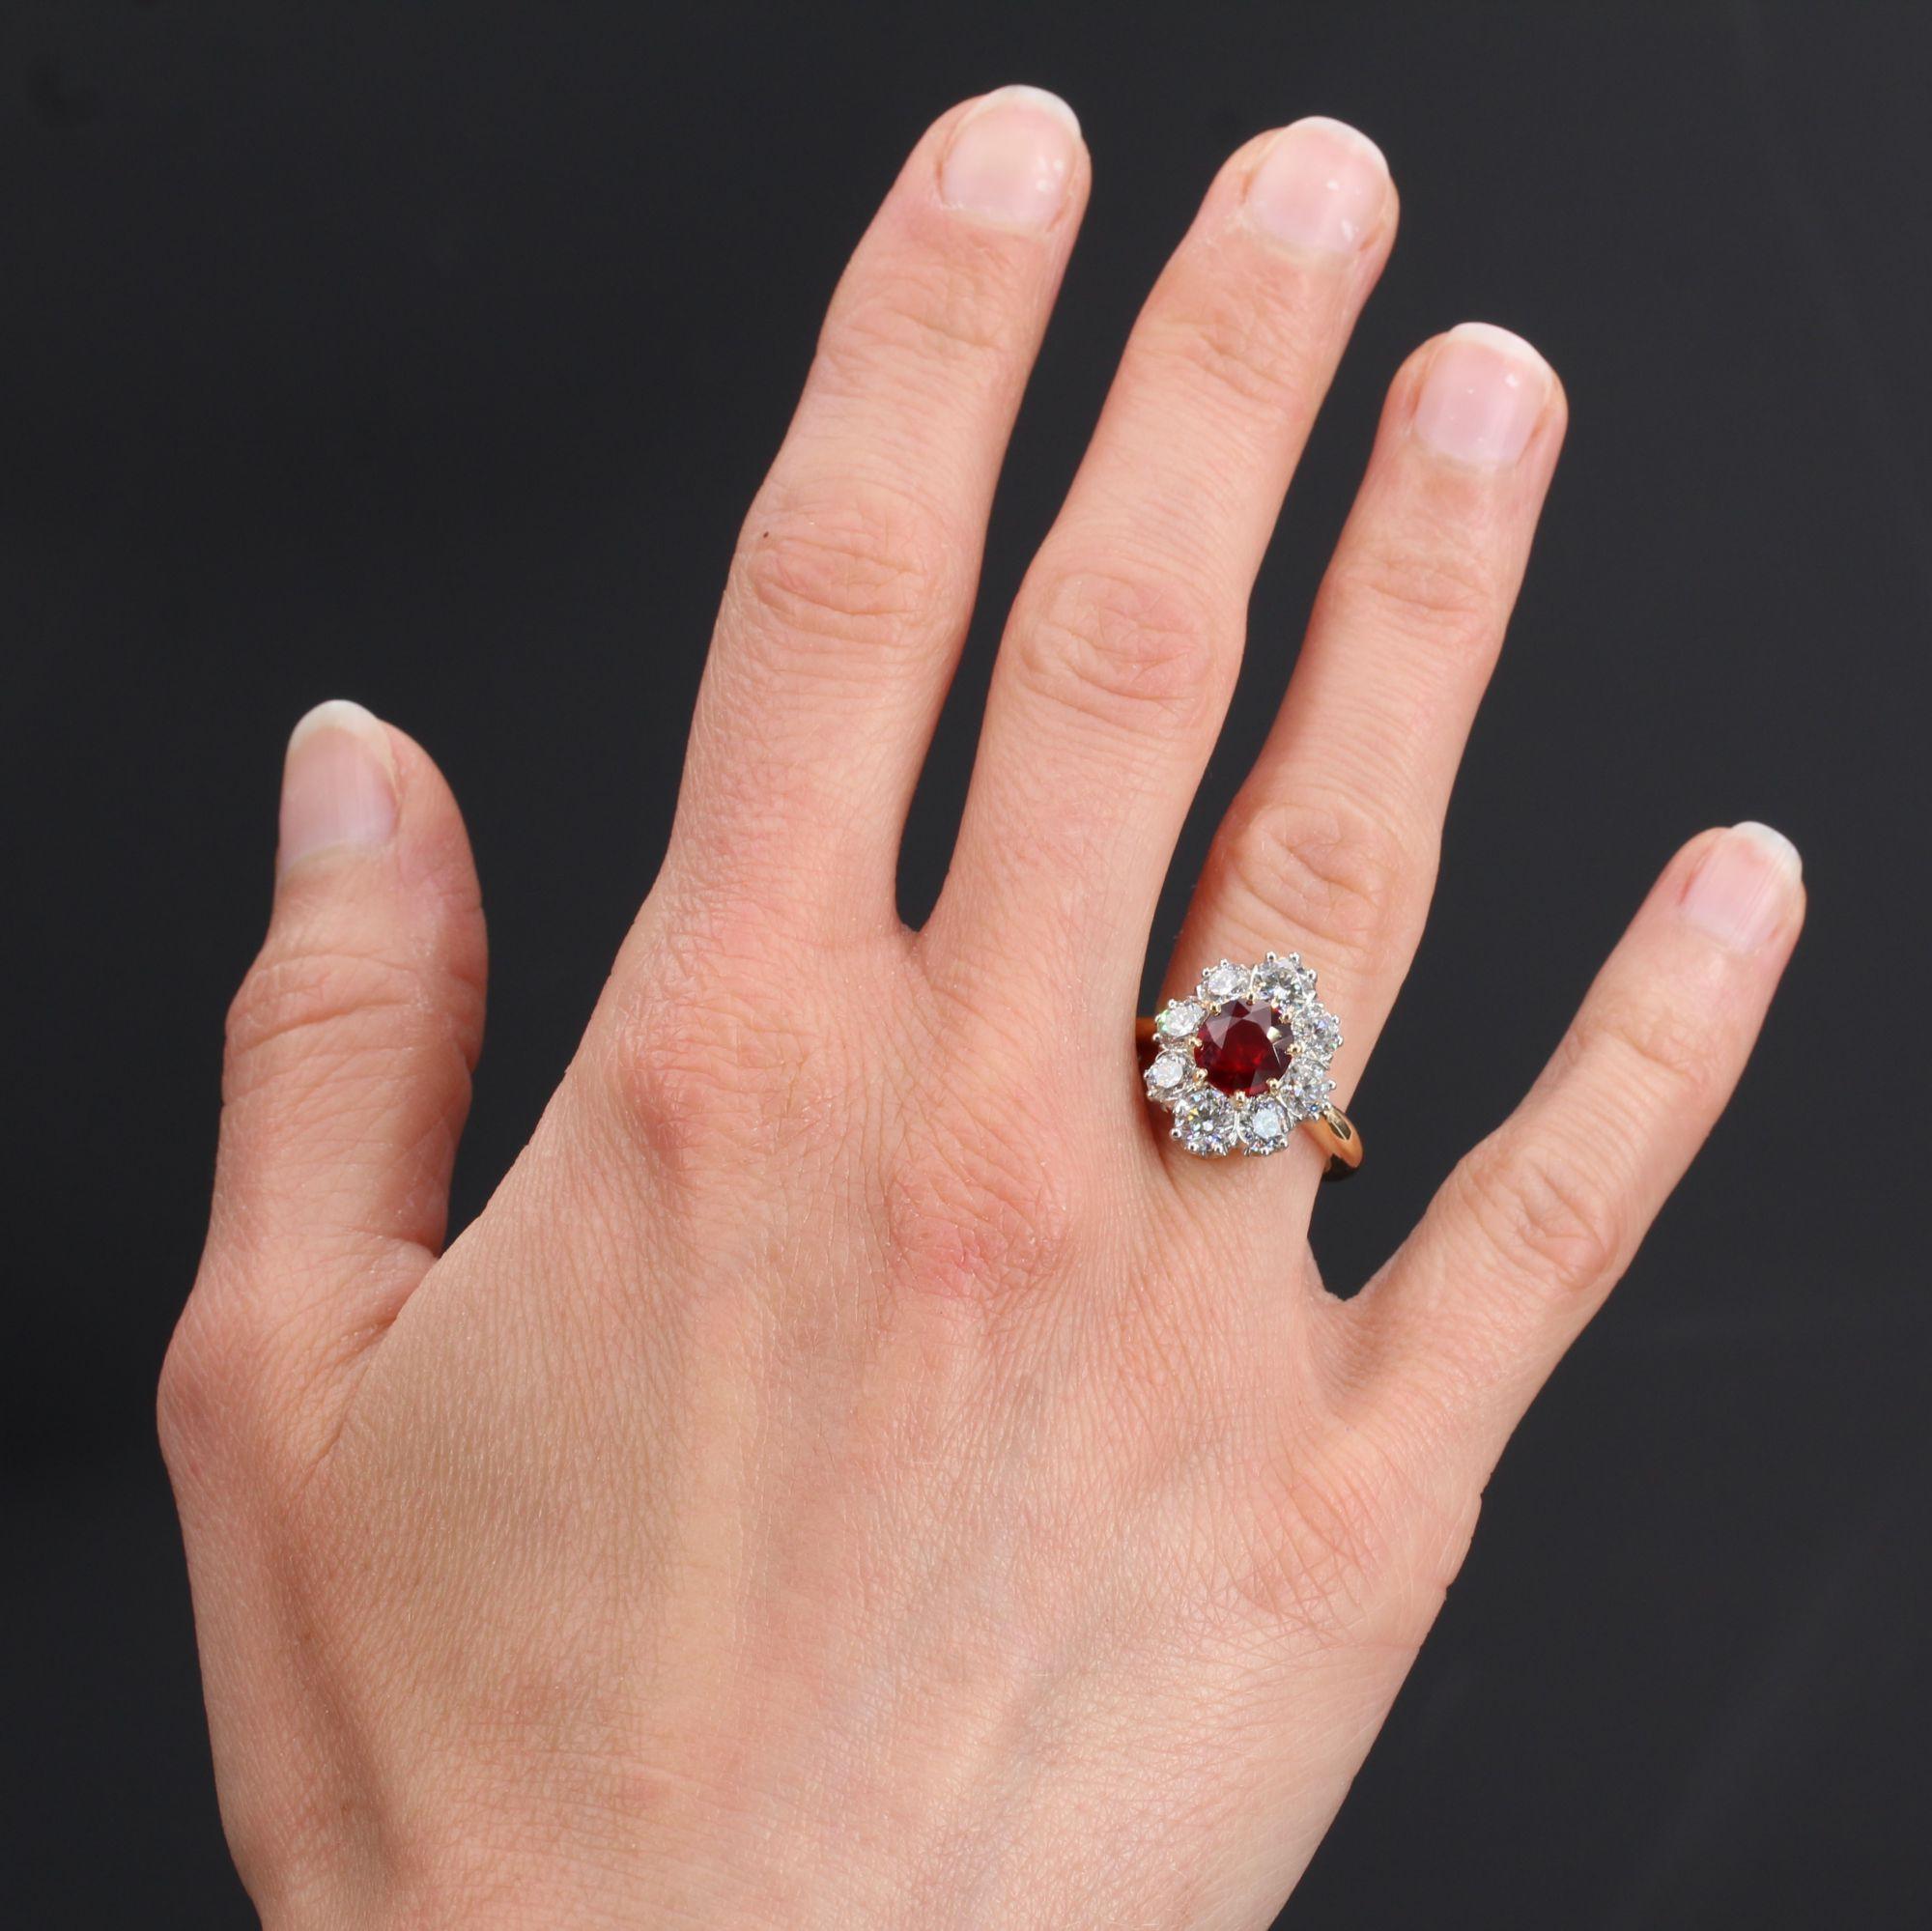 Ring in 18 karat yellow gold, eagle head hallmark and platinum, dog head hallmark.
Oval shape, this sublime ruby ring is set in the center with 8 claws of a cushion-cut ruby surrounded by 8 modern brilliant-cut diamonds set with claws. The setting